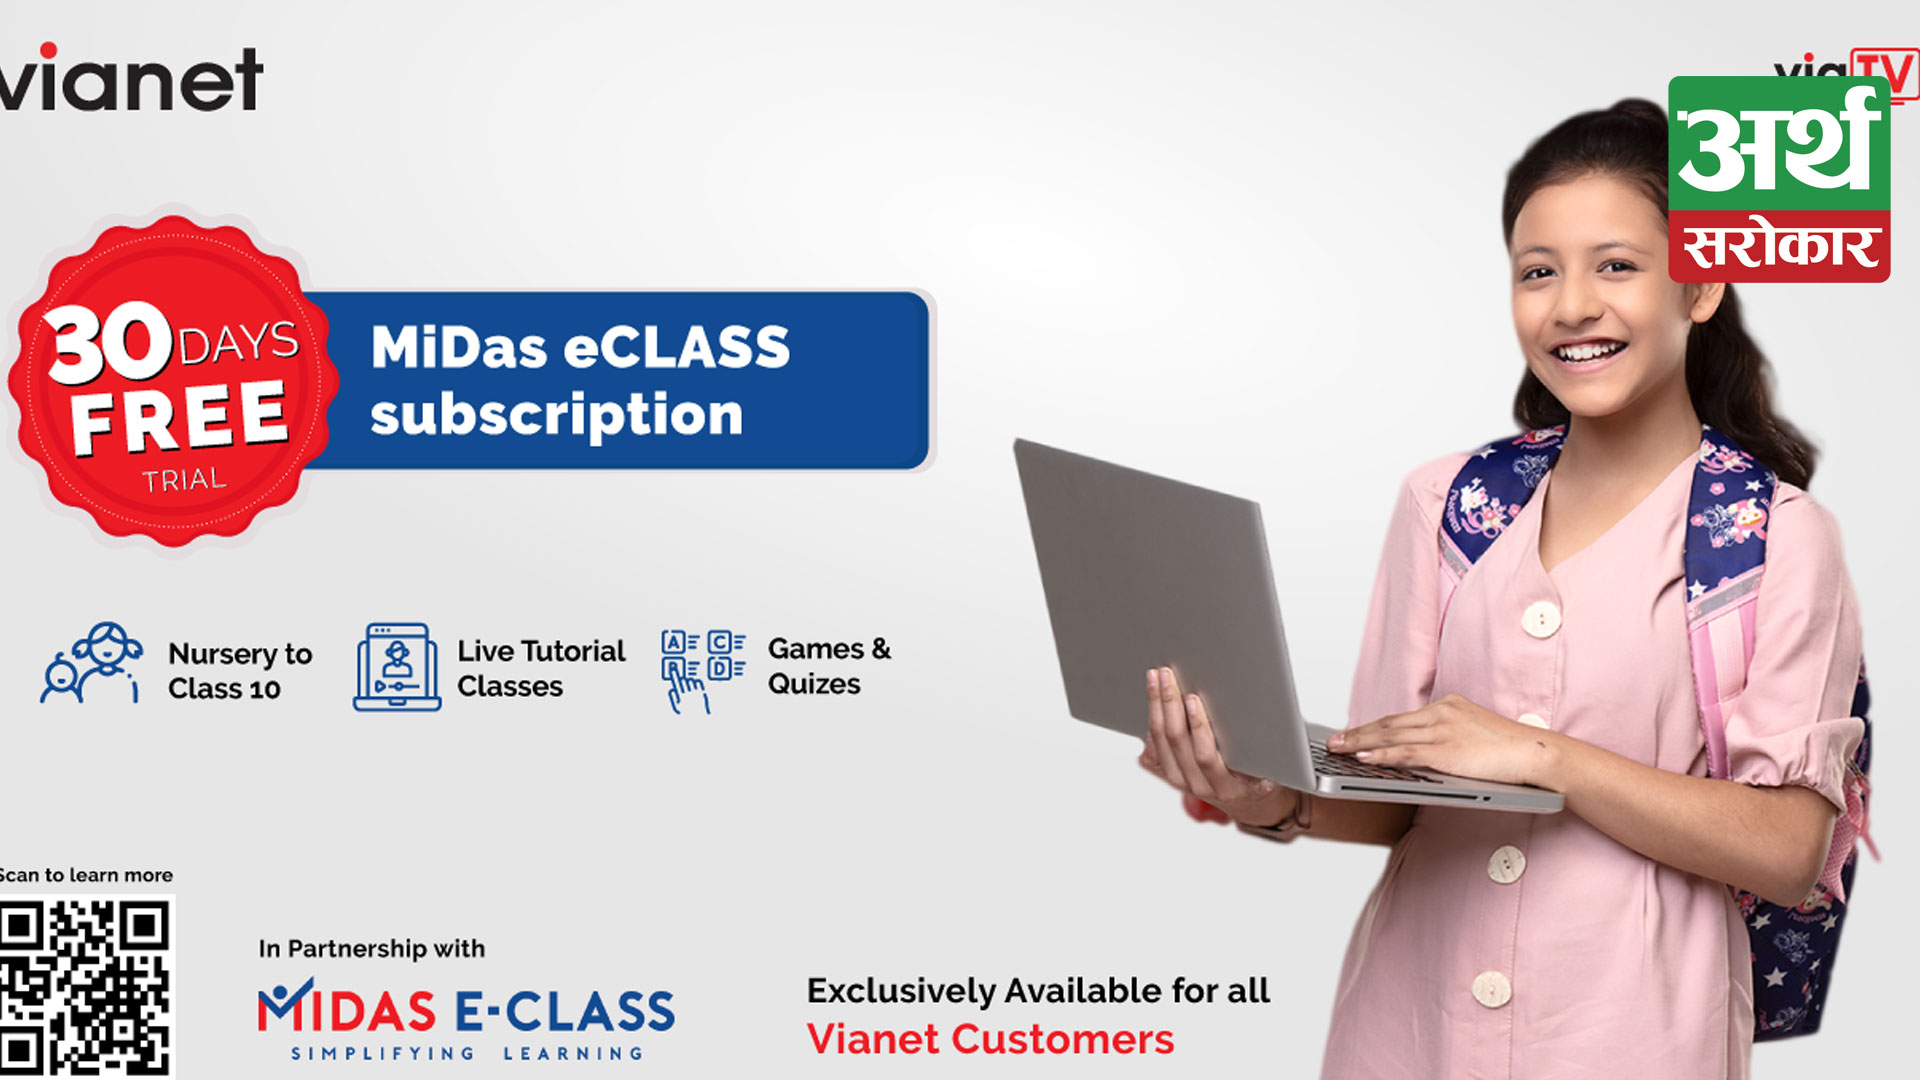 Vianet partners with MiDas eClass to bring digital education to your home